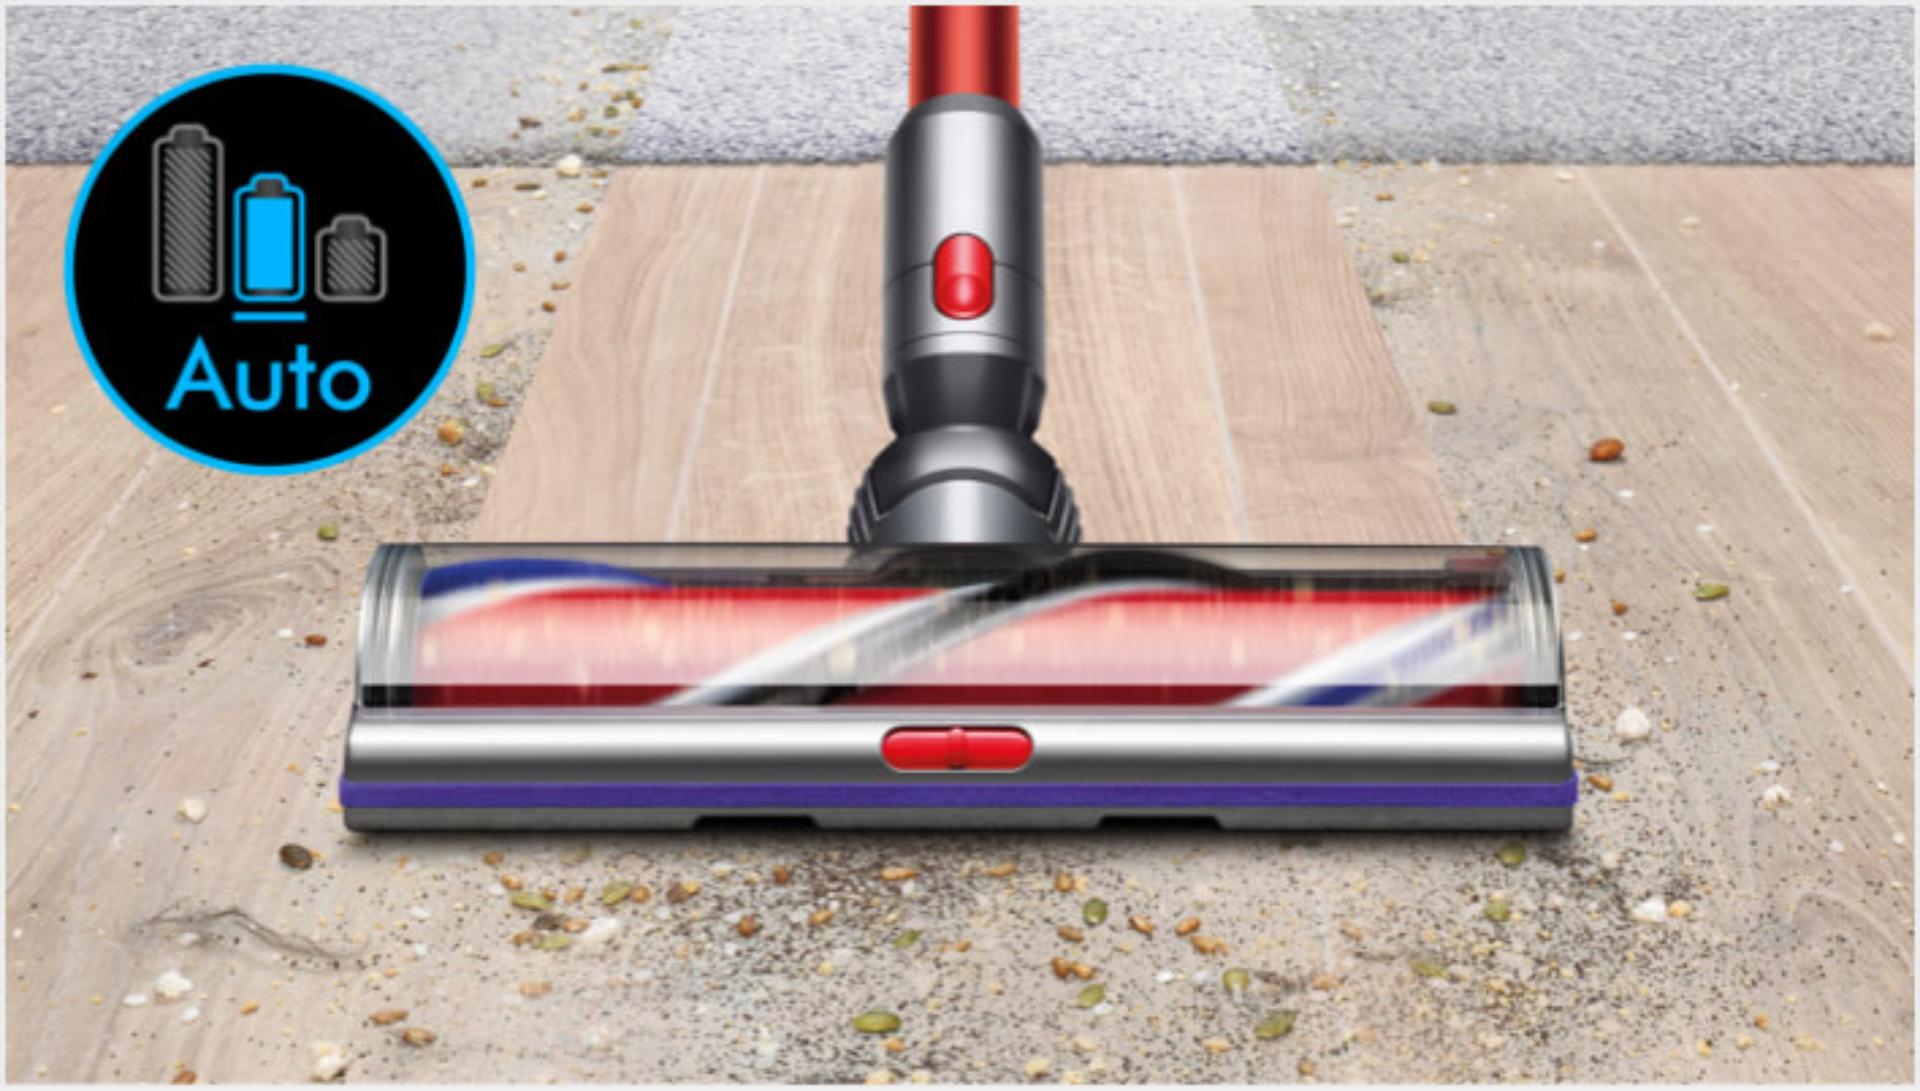 Dyson V11 vacuum being used on different floor types